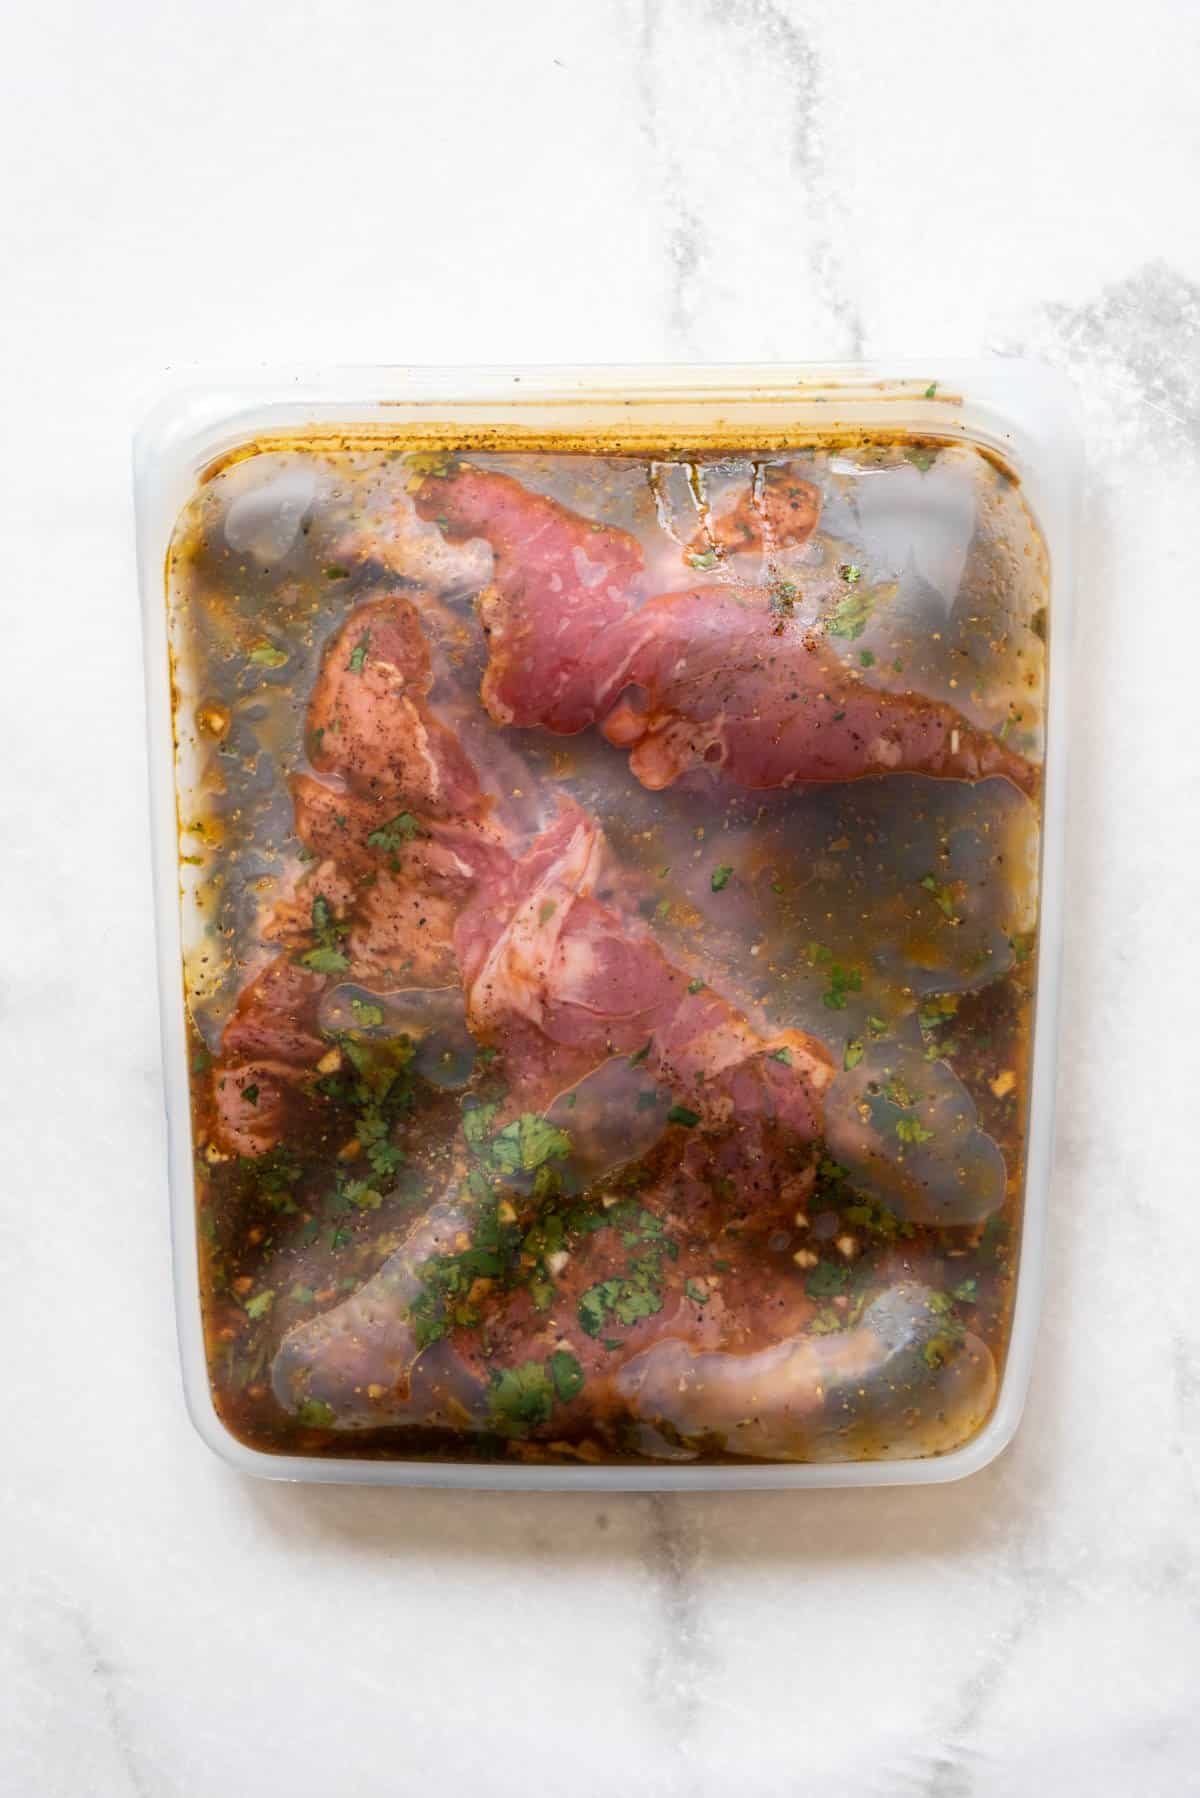 Marinating skirt steak for fajitas in a resealable silicon bag.